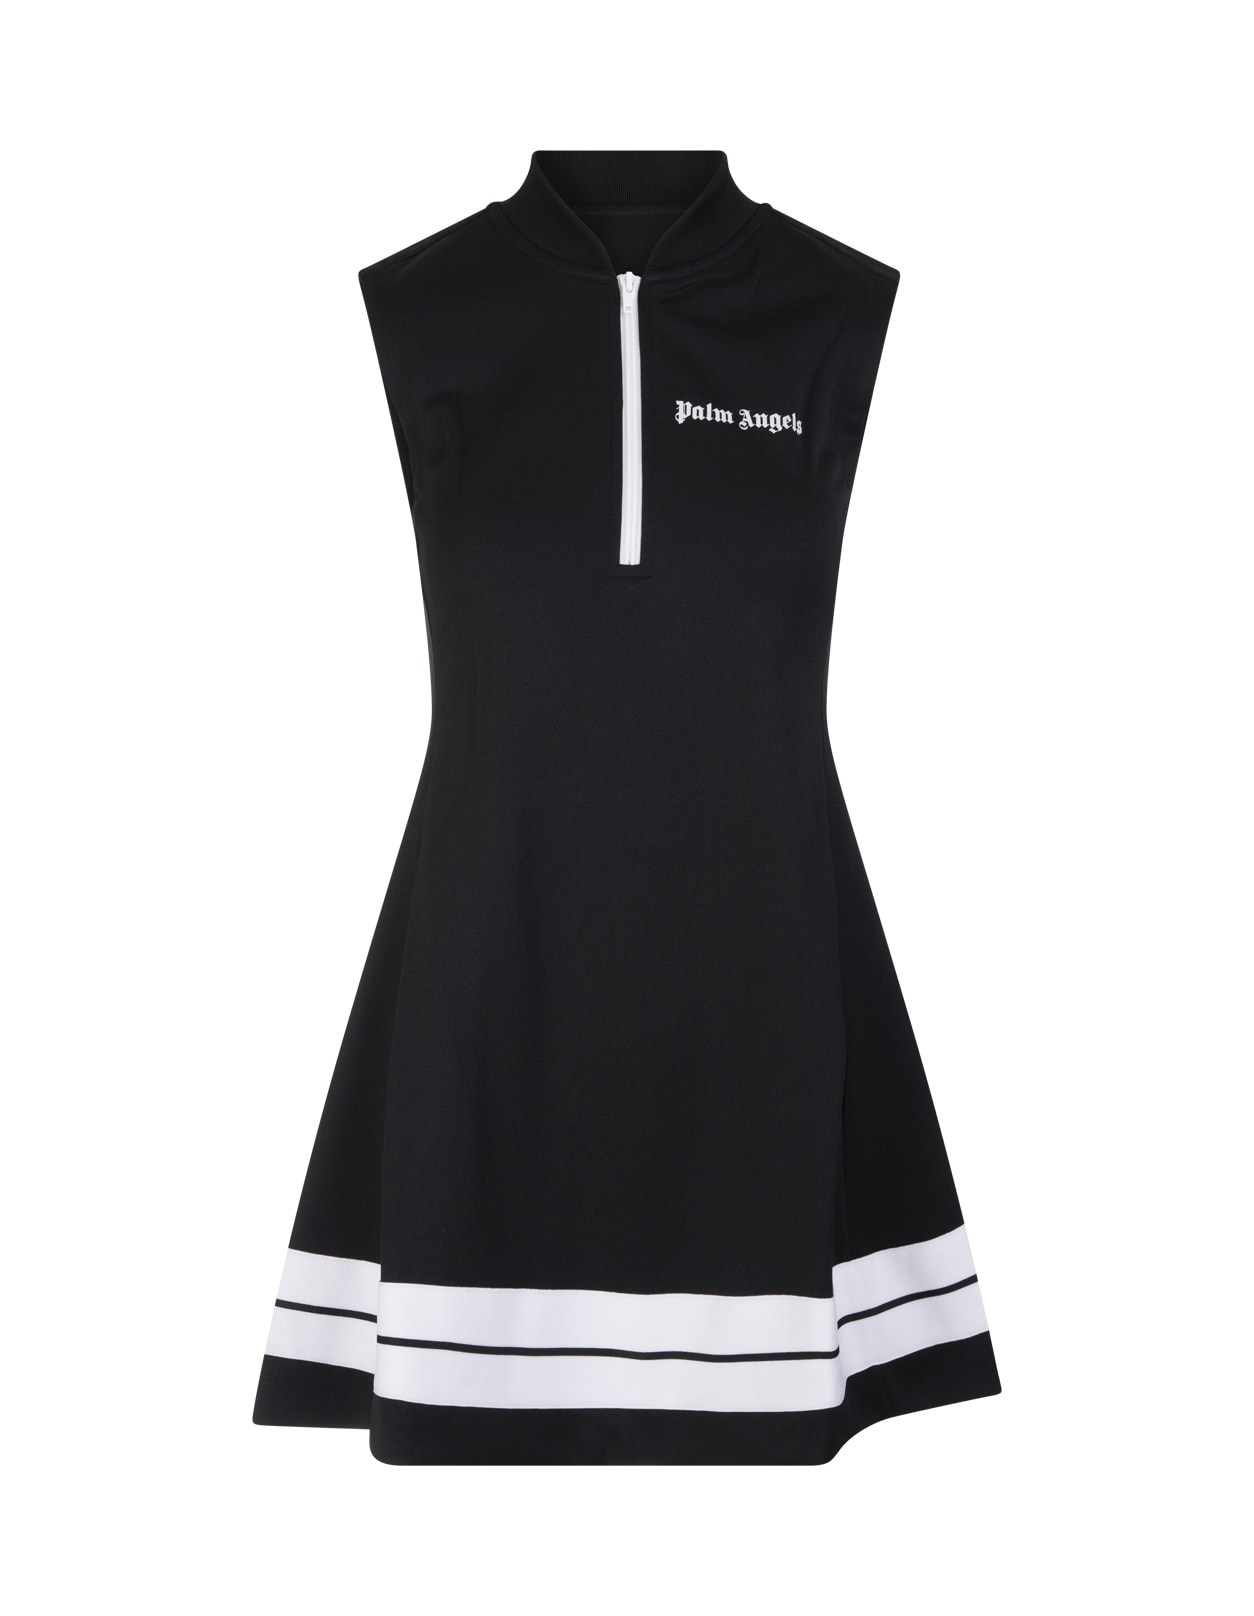 Palm Angels Woman Black Sleeveless Short Dress With Contrast Logo And Bands